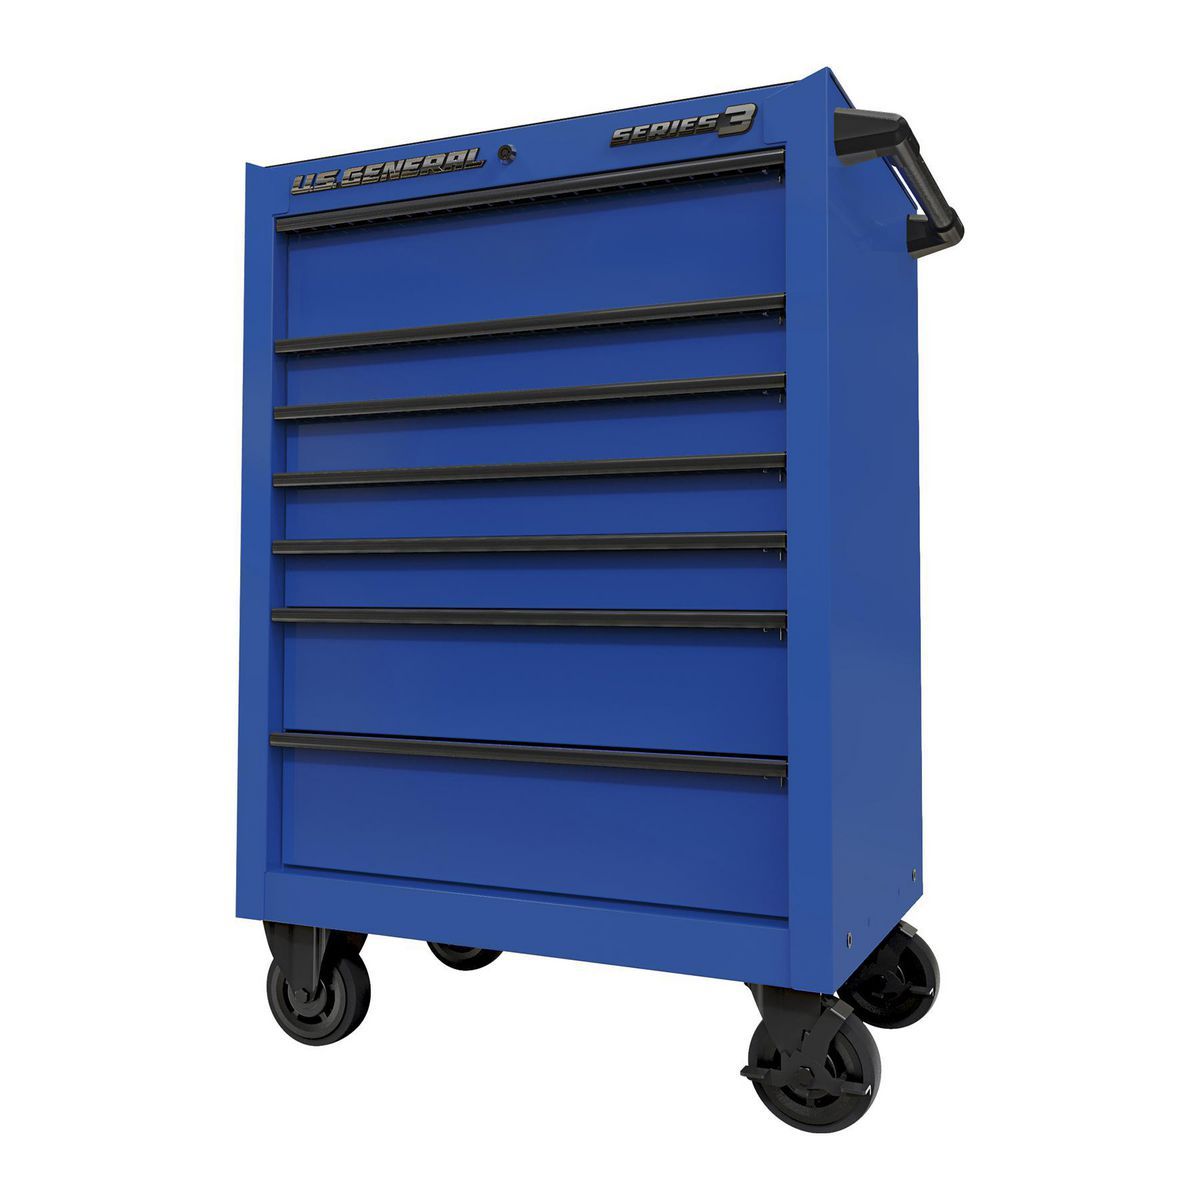 27 in. x 22 in. Roll Cab, Series 3, Blue